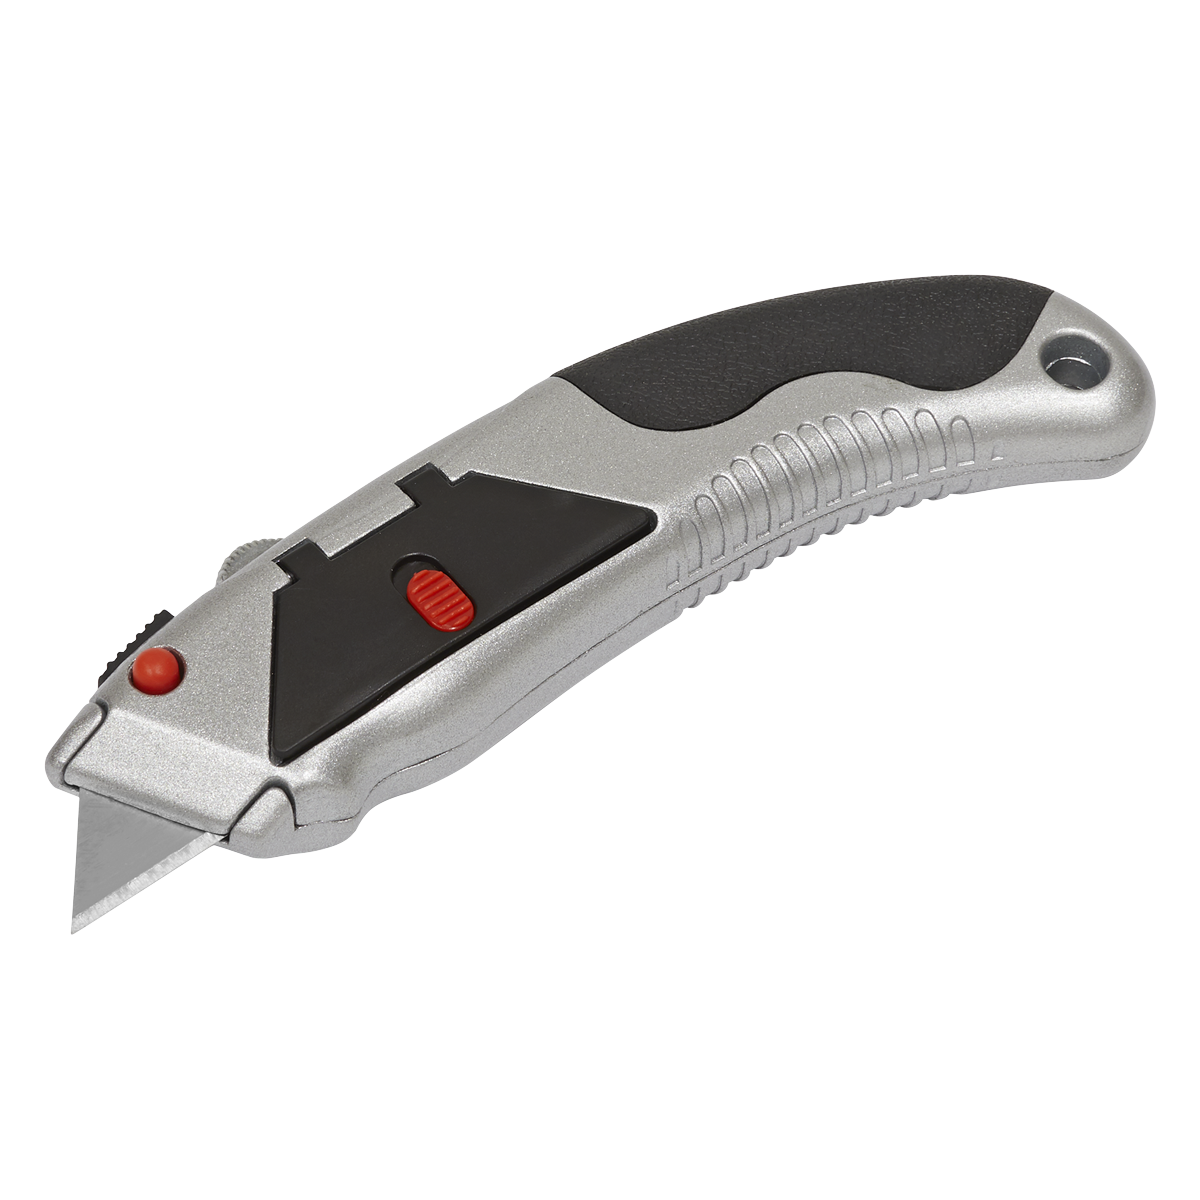 Sealey Retractable Utility Knife Auto-Load S0555